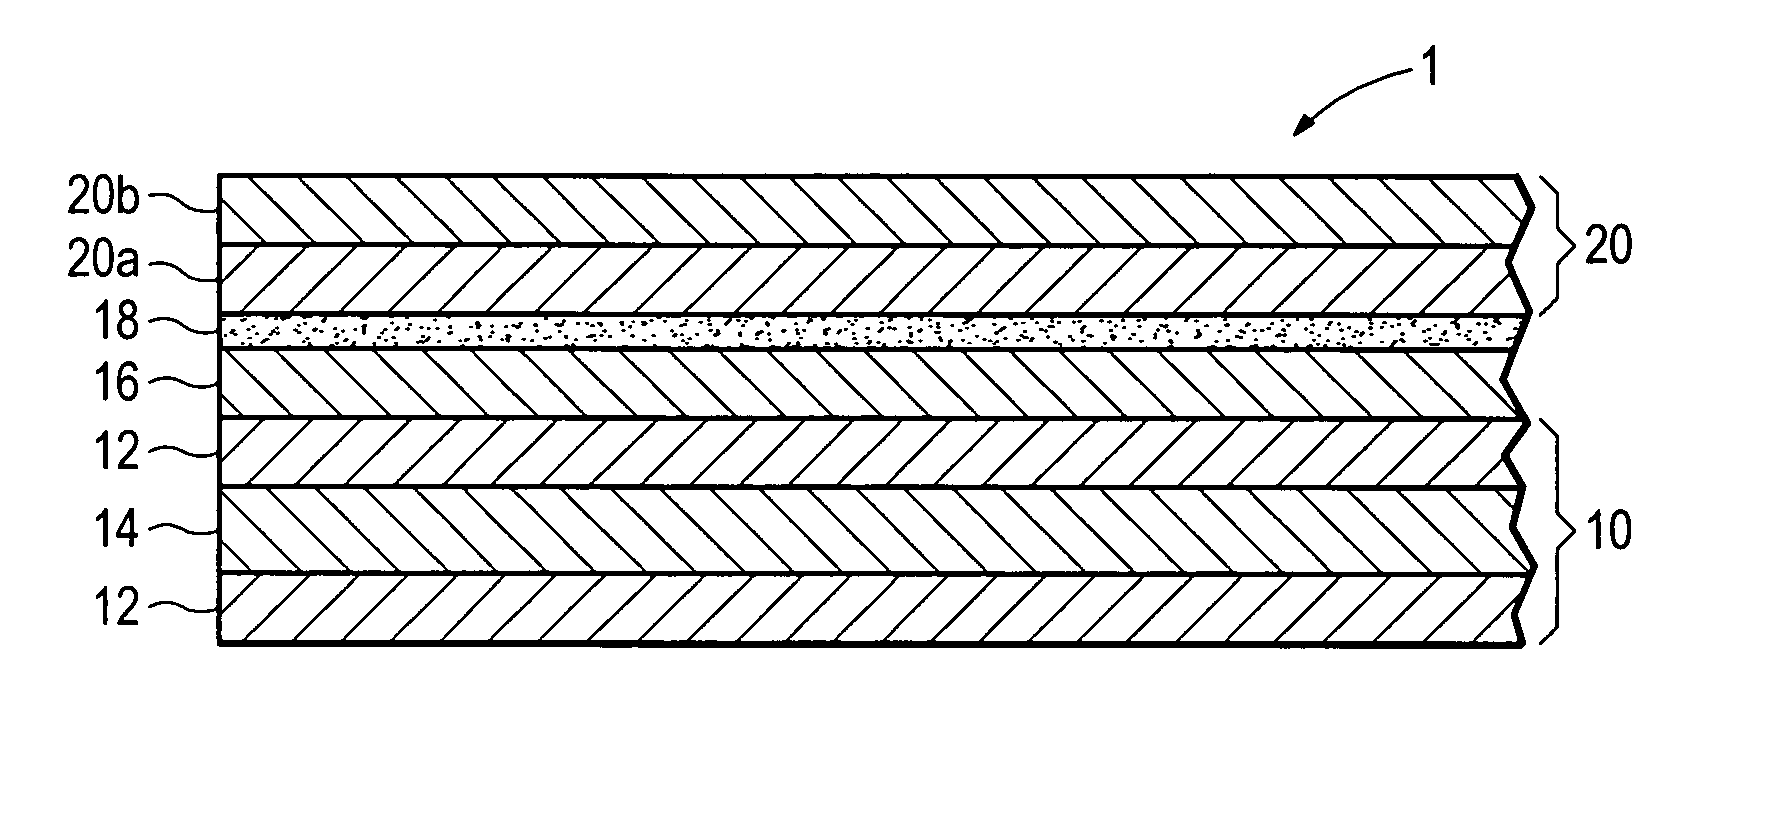 Method of securing flexible solar panel to PVC roofing membrane